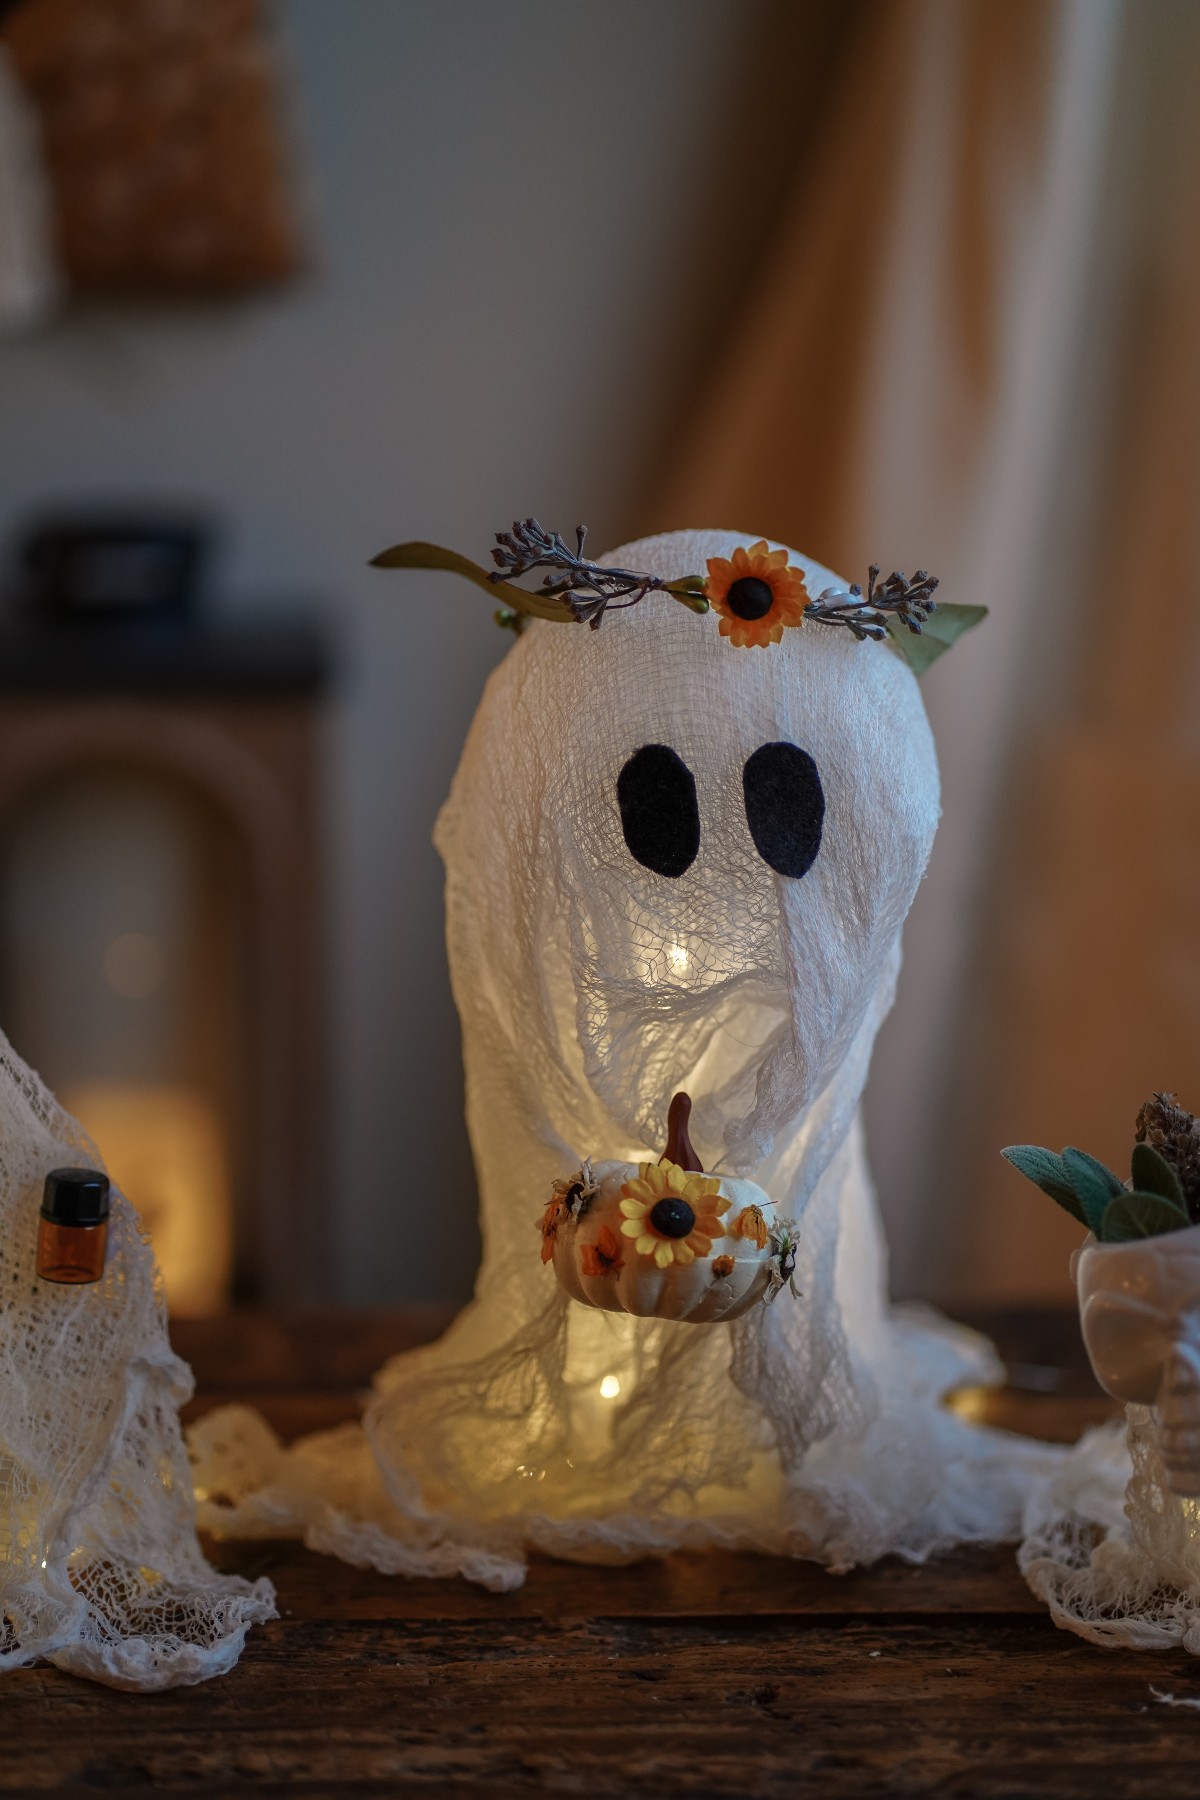 Halloween cheesecloth ghost holding a small pumpkin